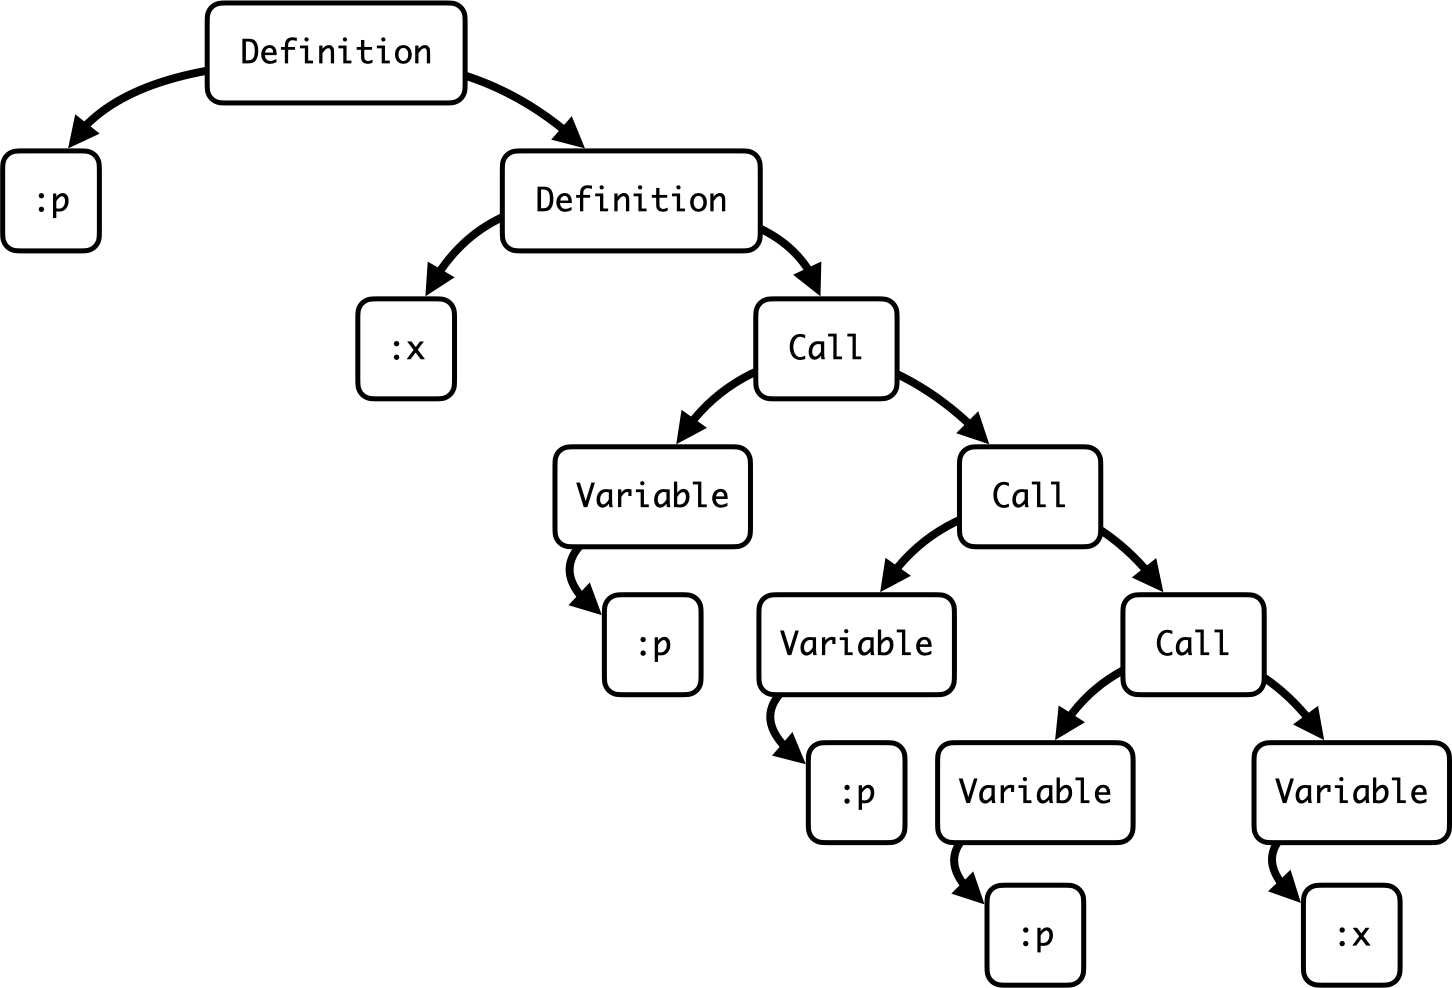 The abstract syntax tree of the encoded number three